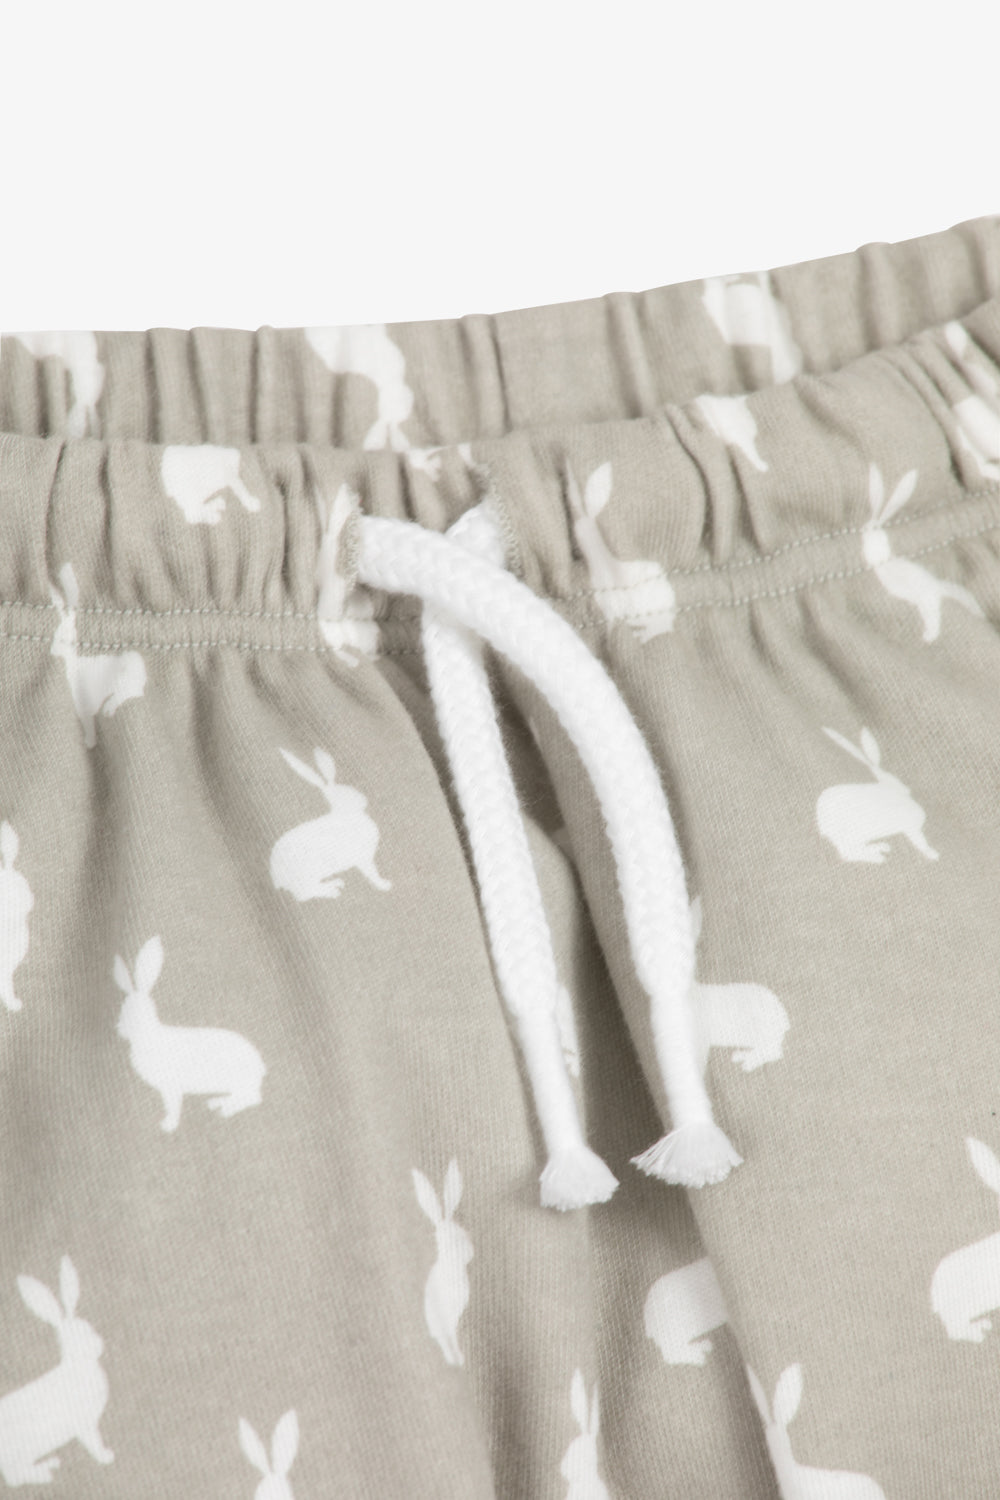 Top and Pants Set, fawn hare print